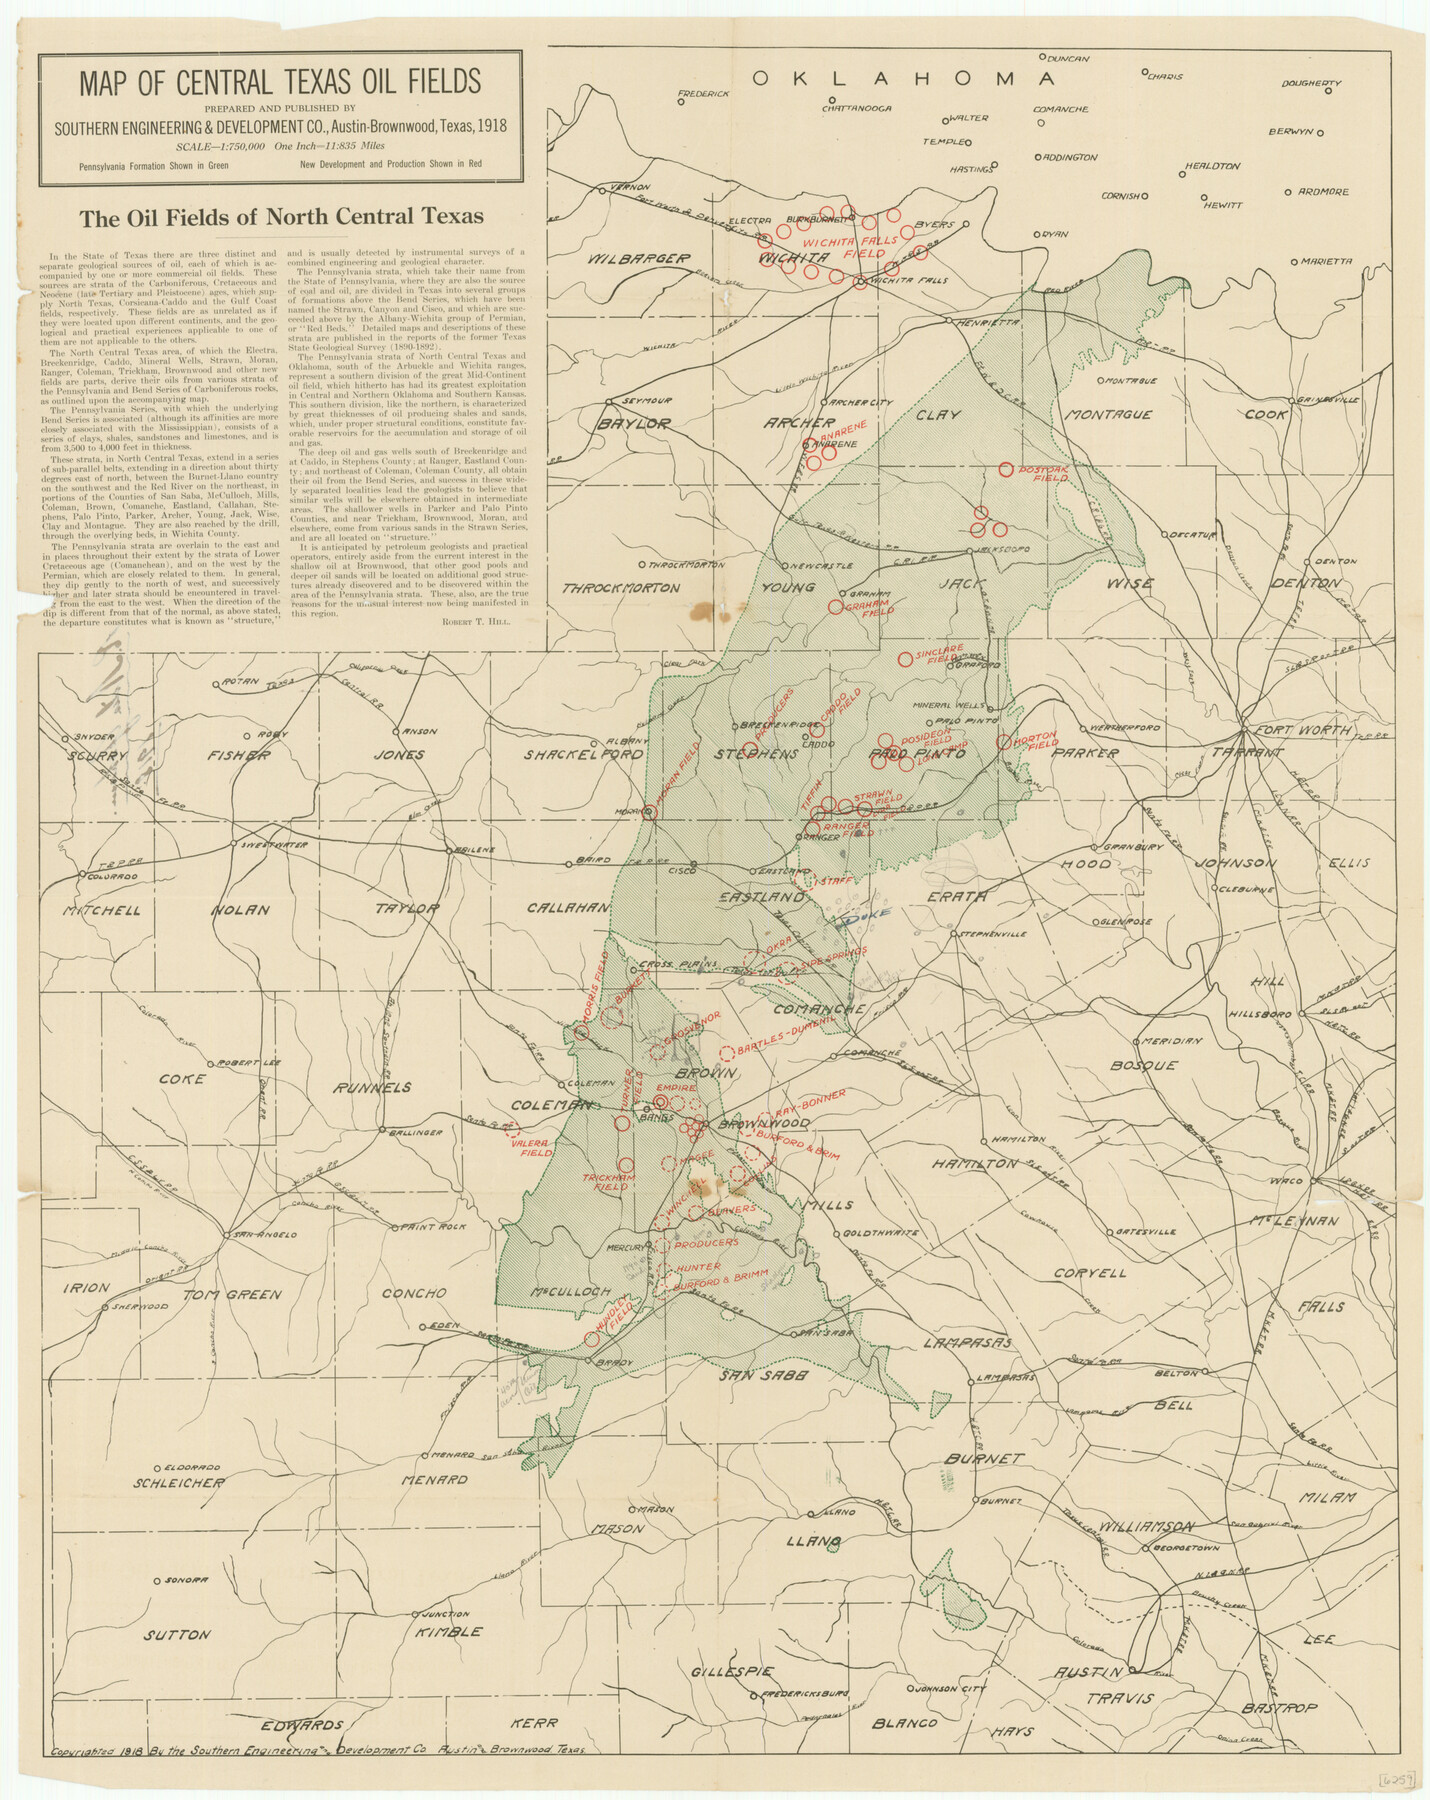 76295, Map of Central Texas Oil Fields, Texas State Library and Archives